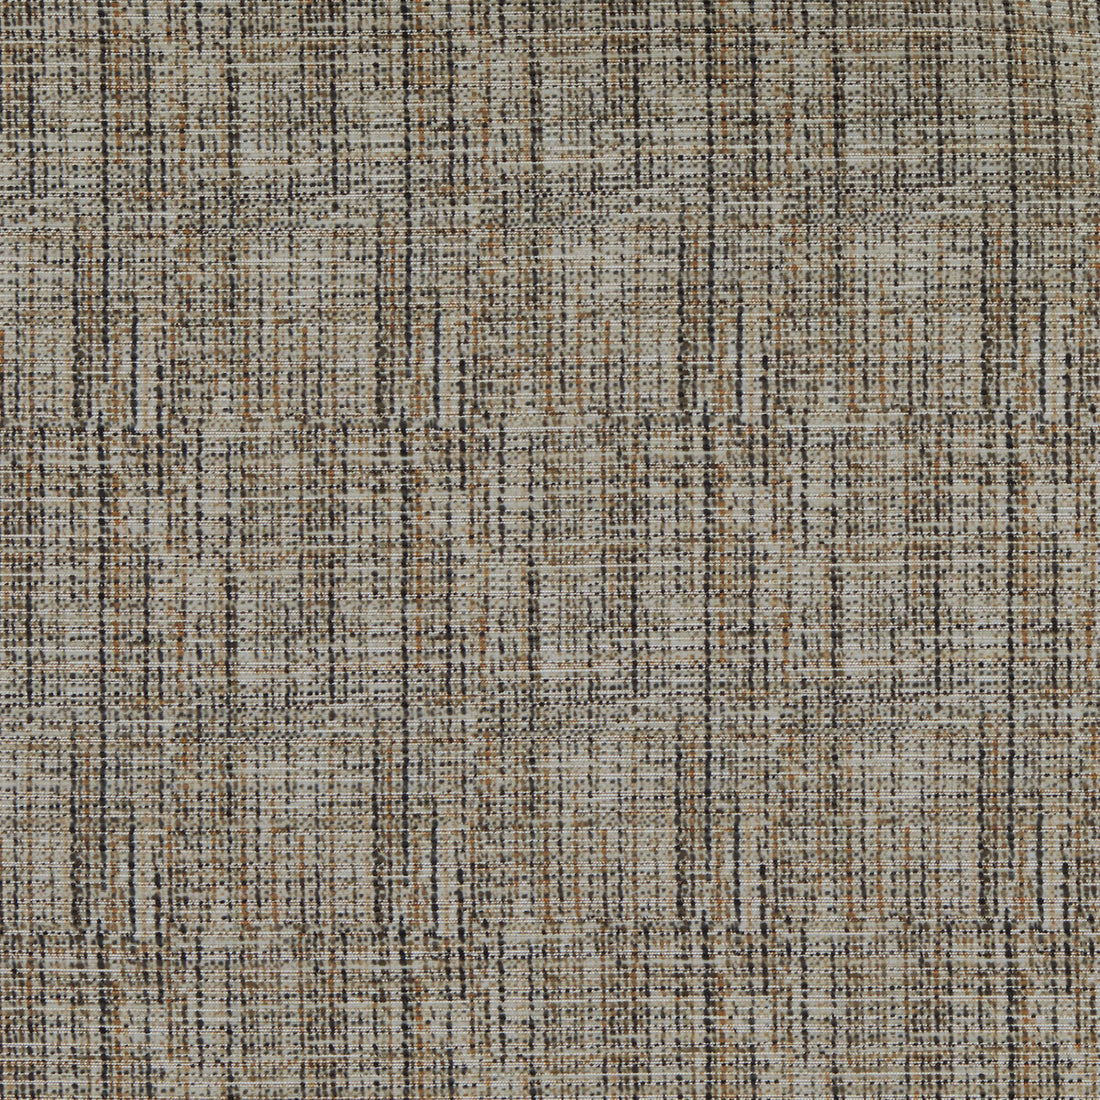 Annika fabric in charcoal color - pattern F1622/01.CAC.0 - by Clarke And Clarke in the Clarke And Clarke Vardo Sheers collection